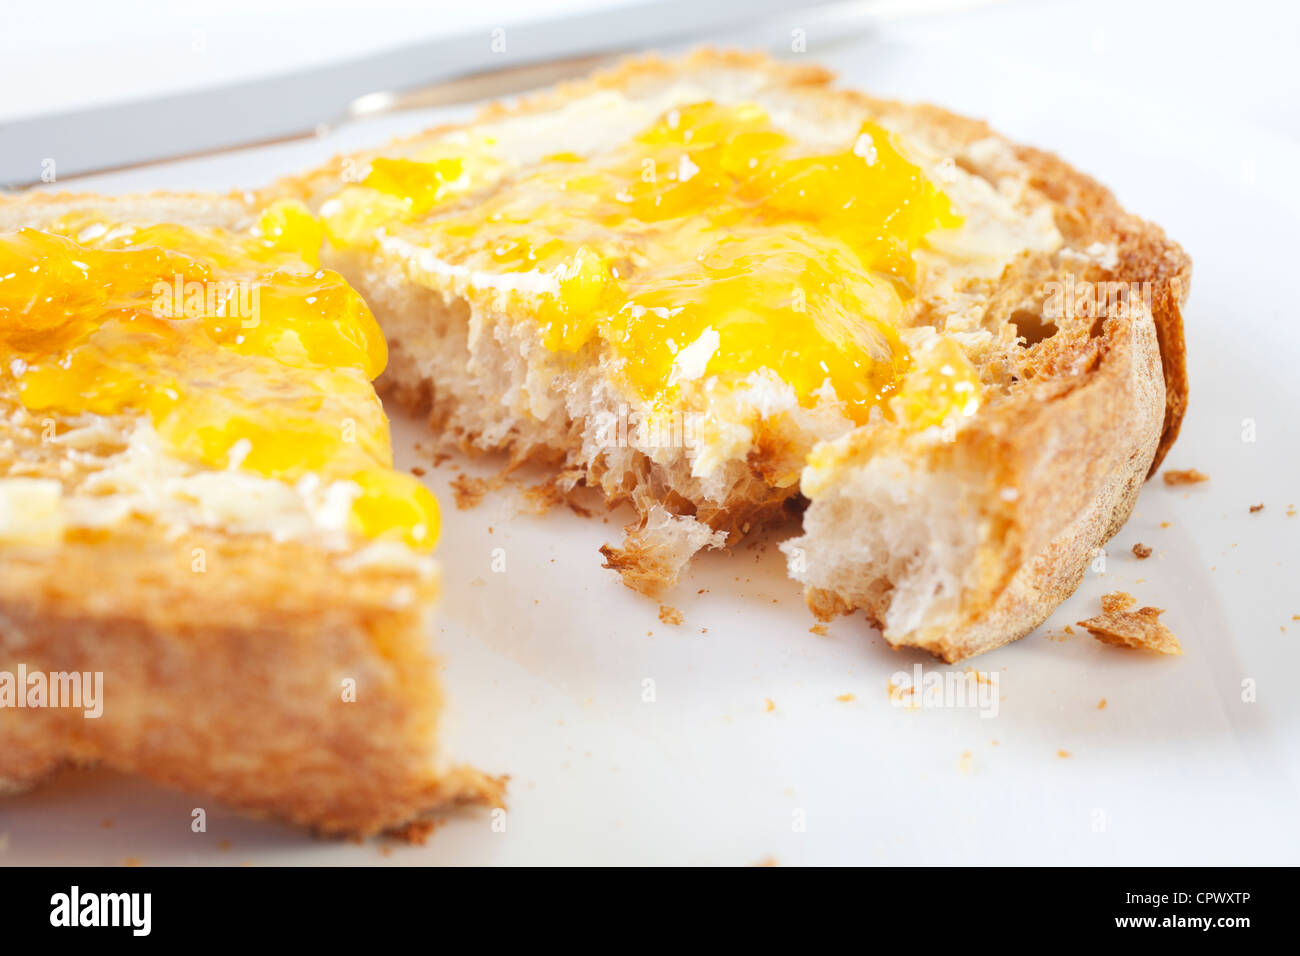 Crunchy toast with marmalade on a white plate. Stock Photo